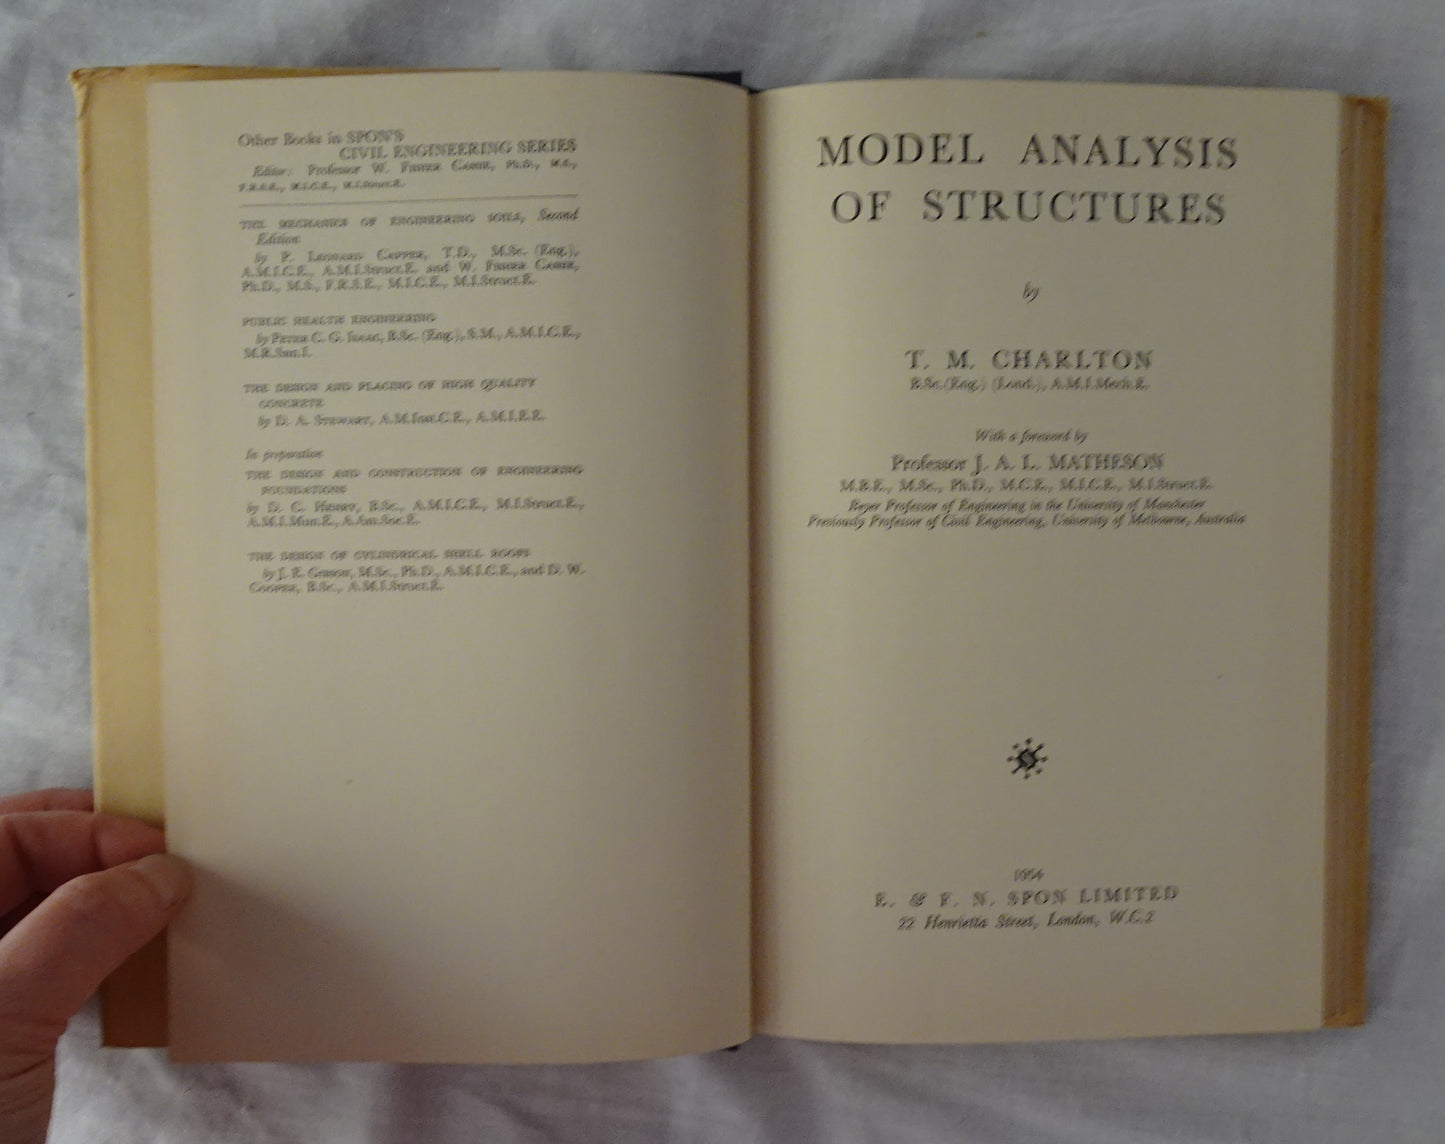 Model Analysis of Structures by T. M. Charlton